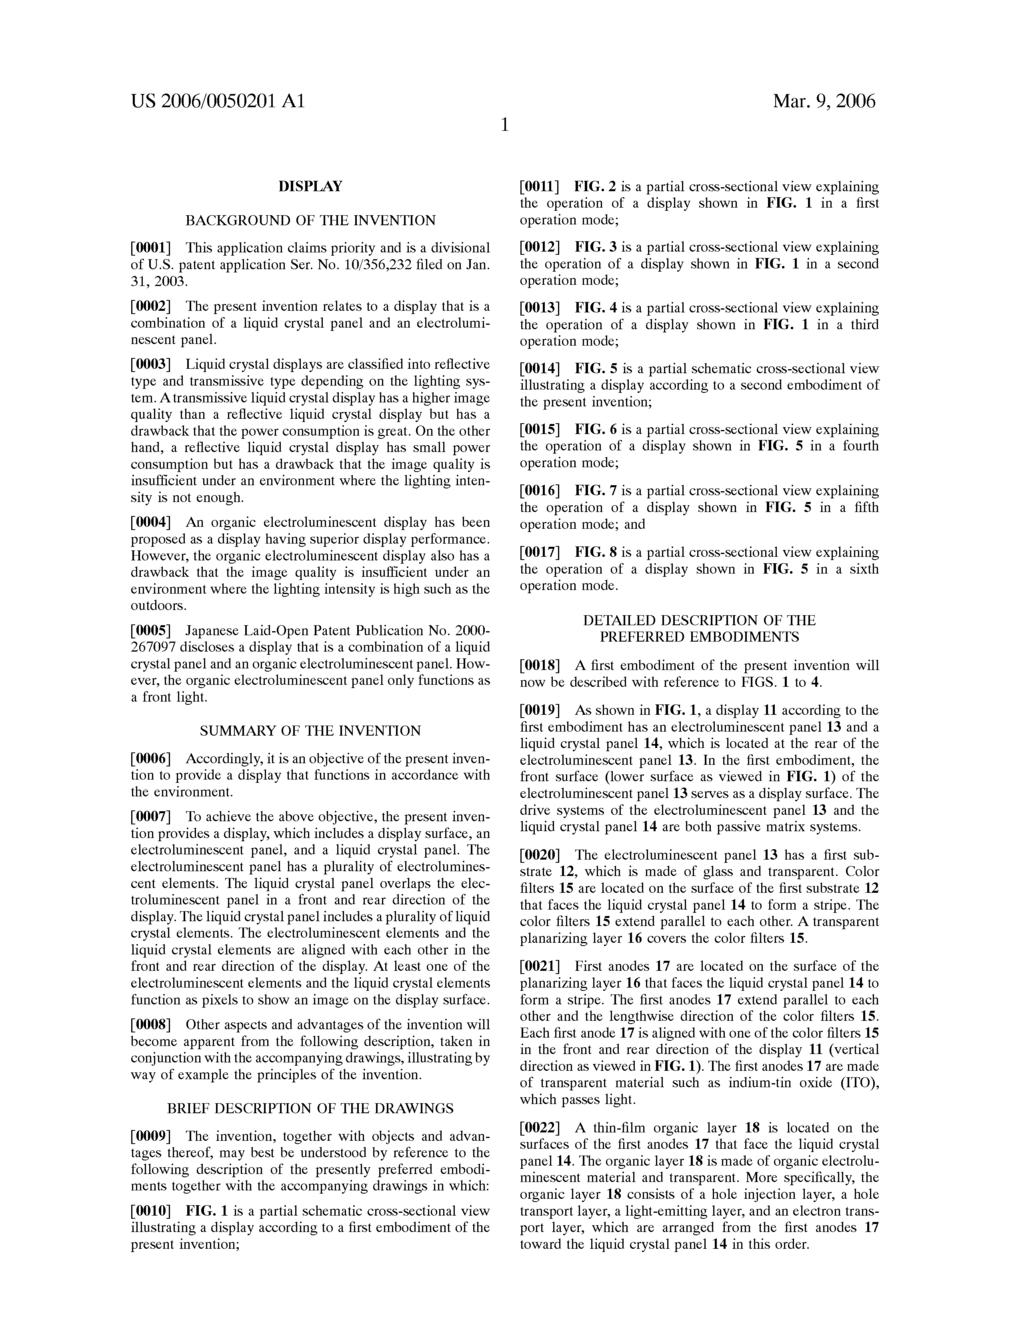 DISPLAY BACKGROUND OF THE INVENTION 0001. This application claims priority and is a divisional of U.S. patent application Ser. No. 10/356.232 filed on Jan. 31, 2003.